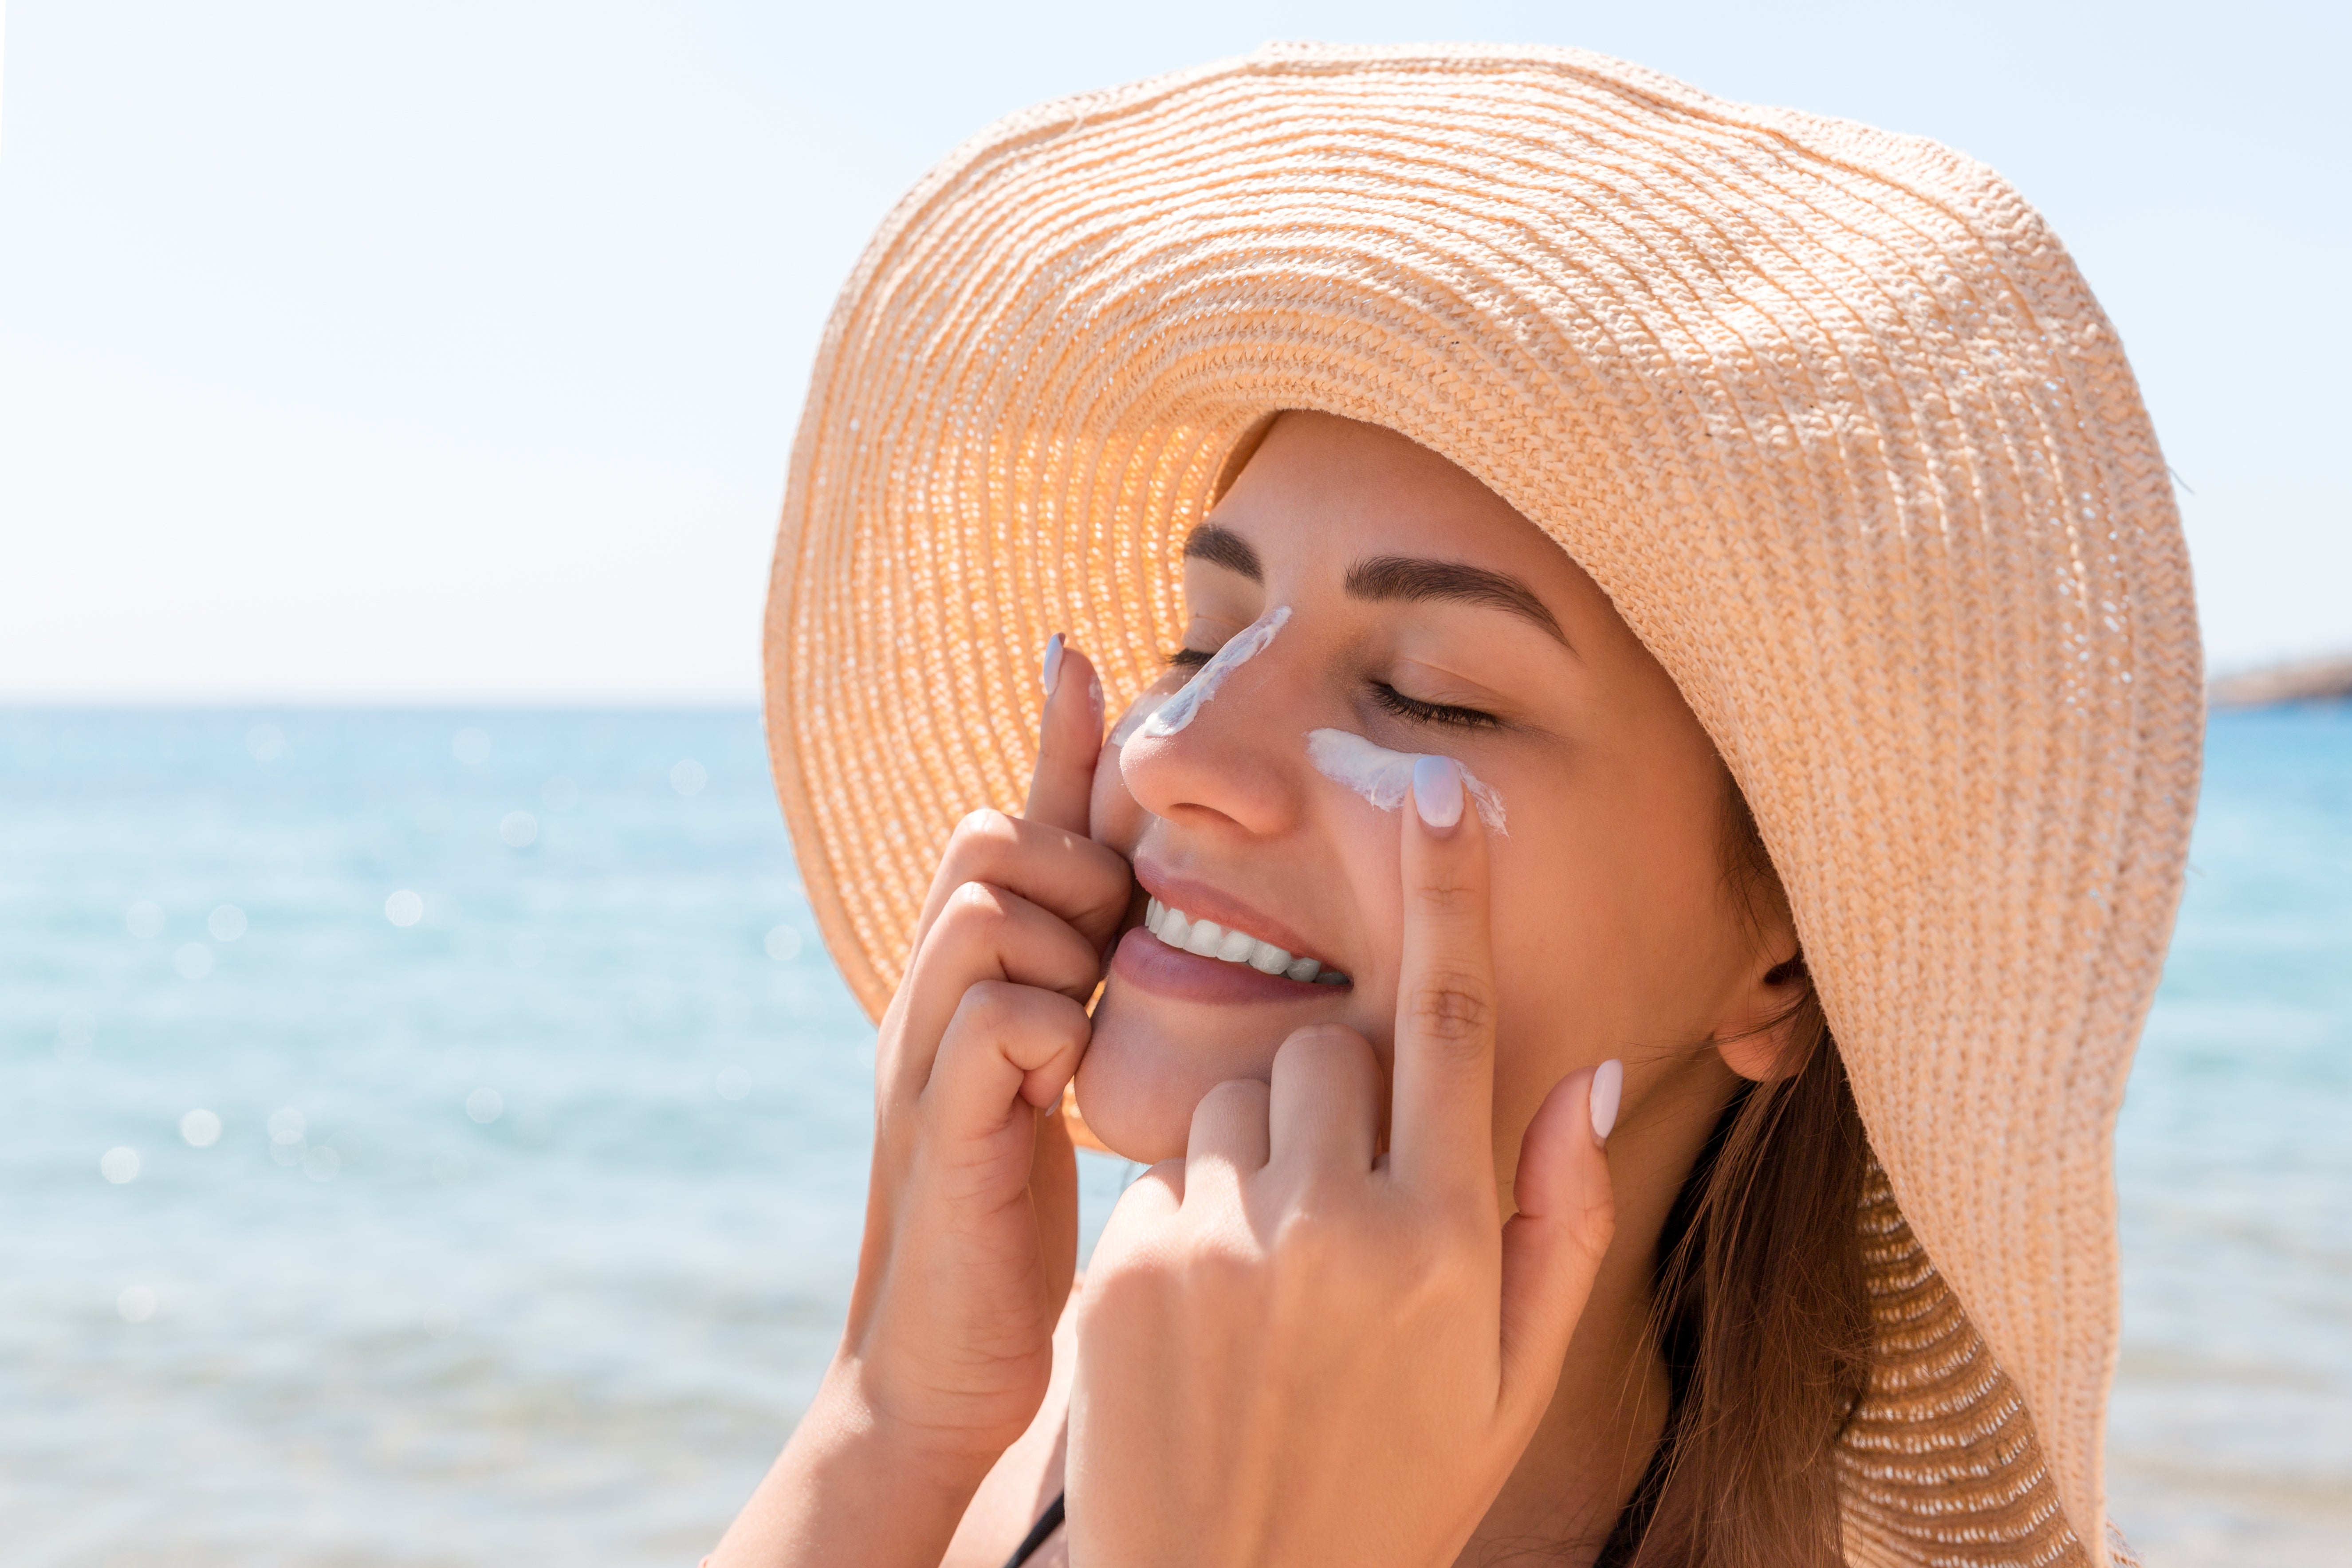 Safer Sunscreens - Why You Need To Consider Mineral Suncare For You and Your Family